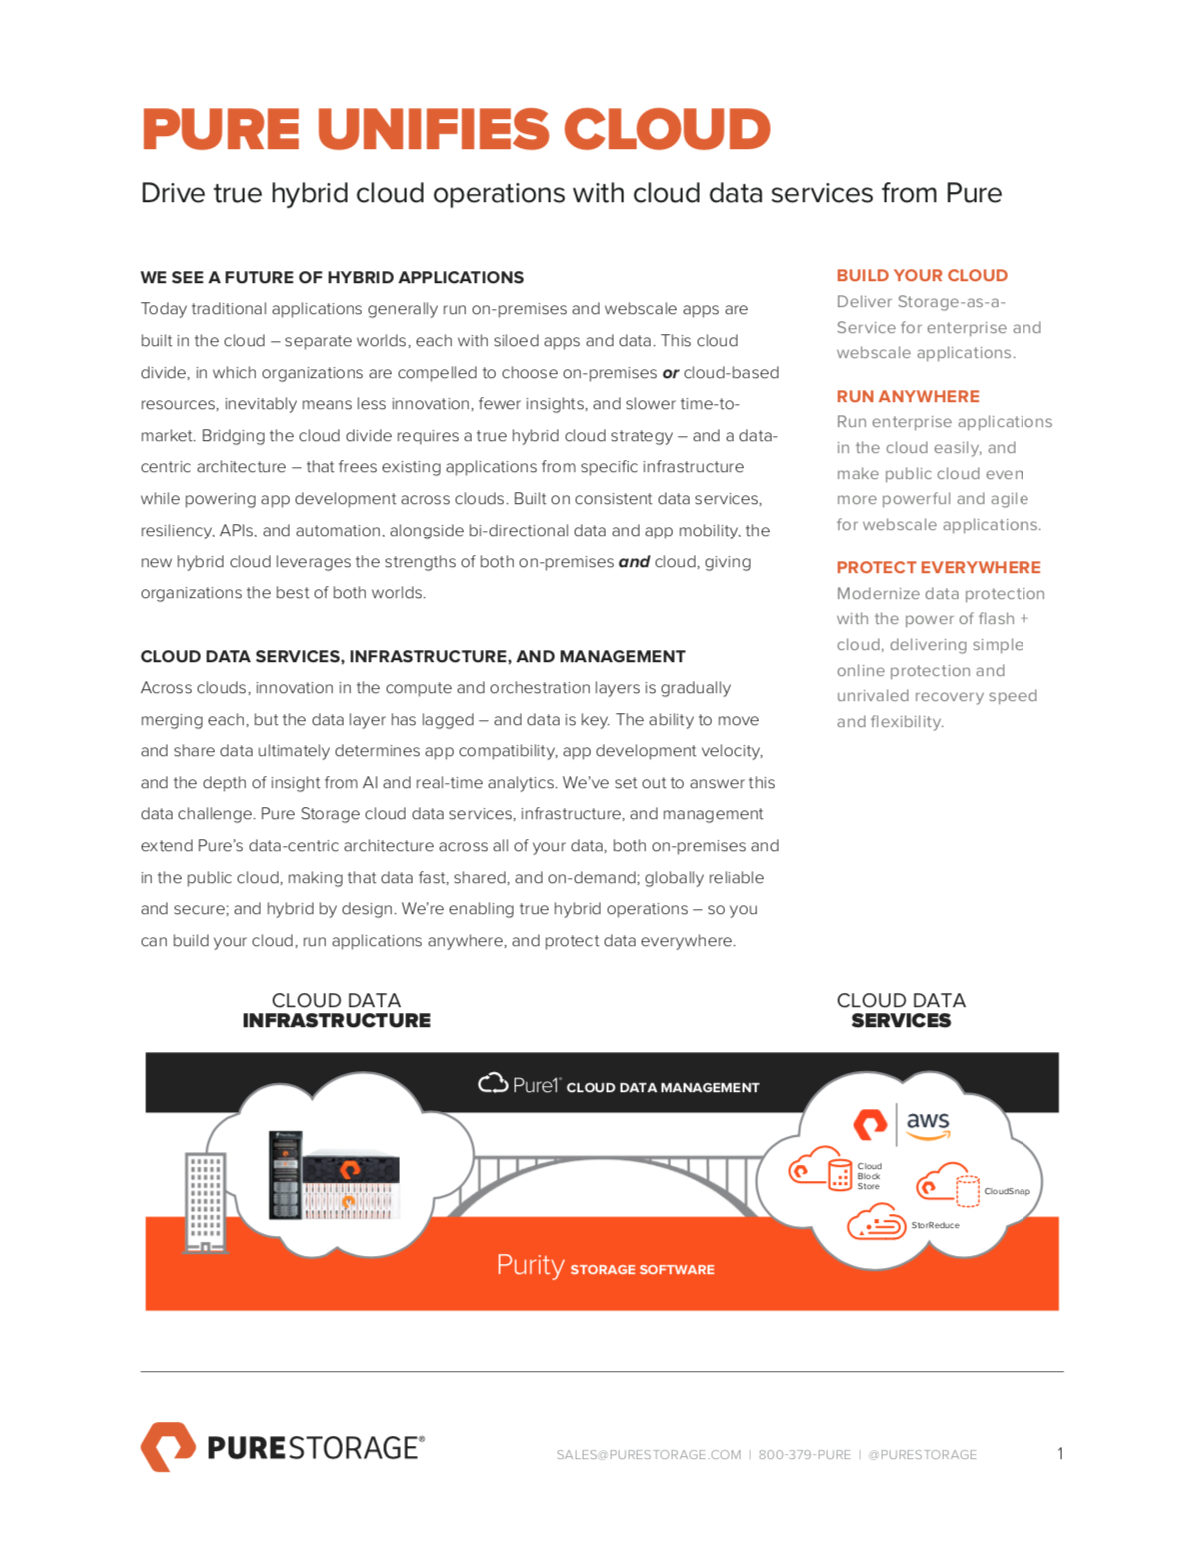 Pure Unifies Cloud - Drive true hybrid cloud operations with cloud data services from Pure